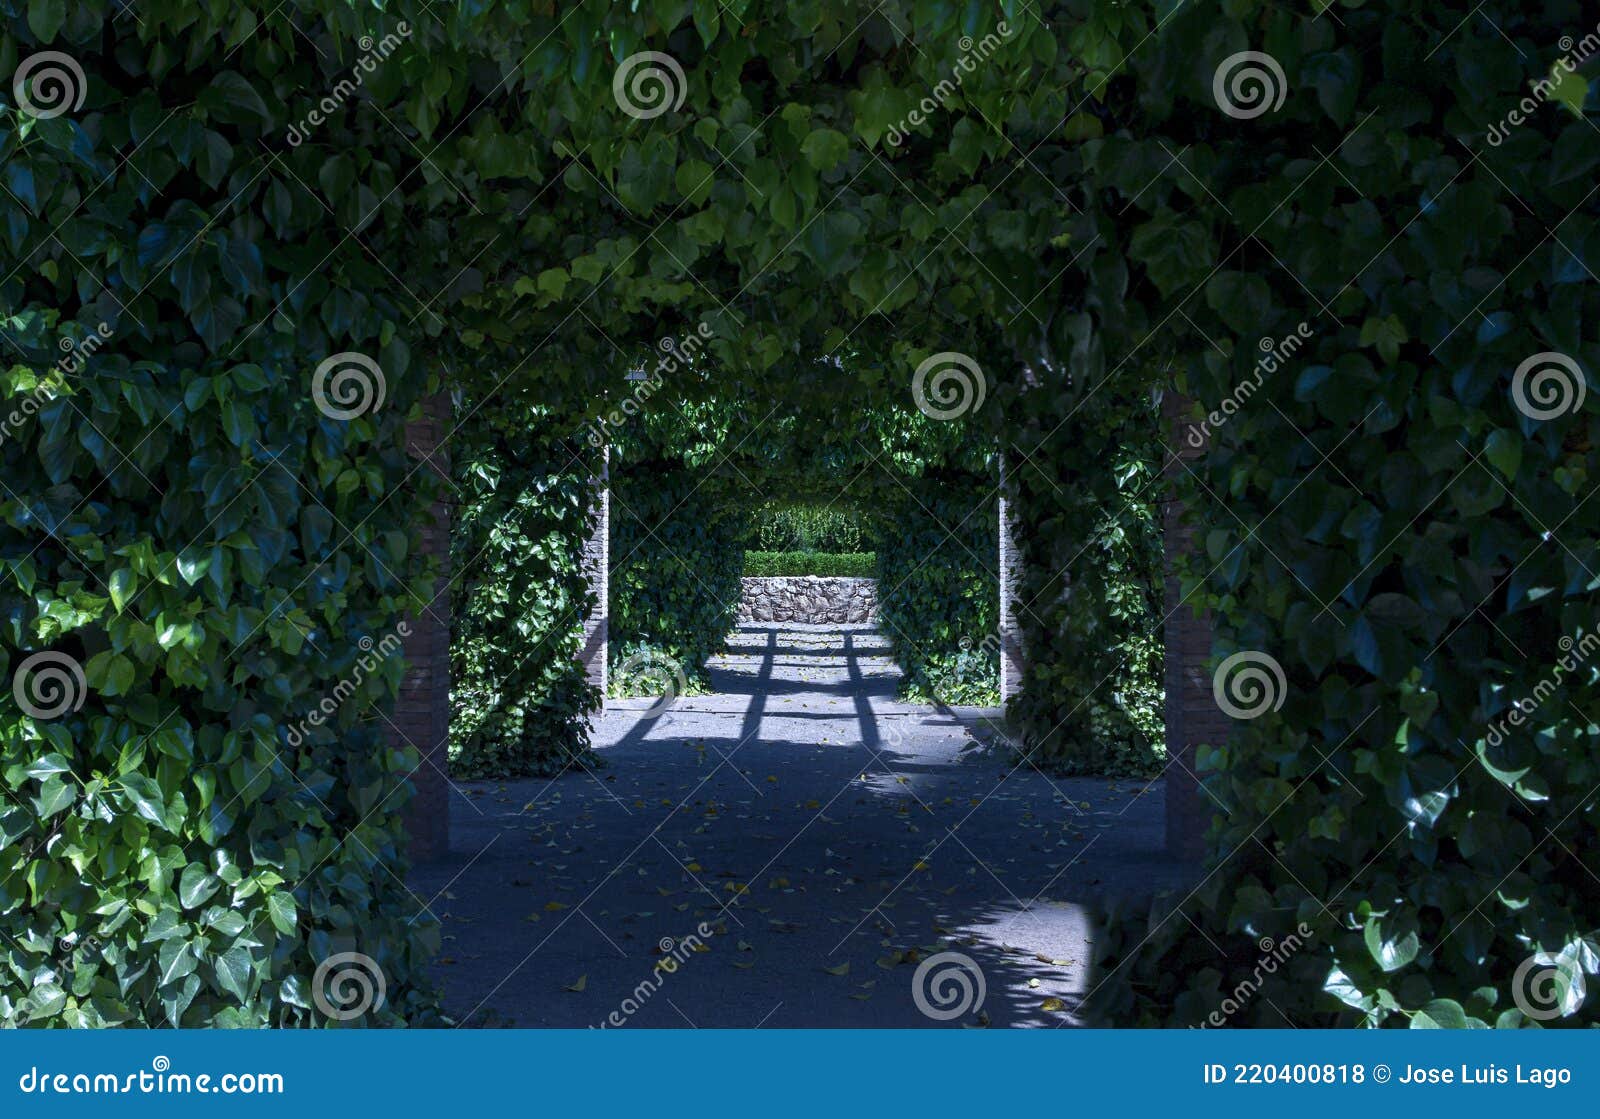 path with several arches created by ivy hedera helix, magnoliophyta, magnoliopsida that gives shade and forms a beautiful view